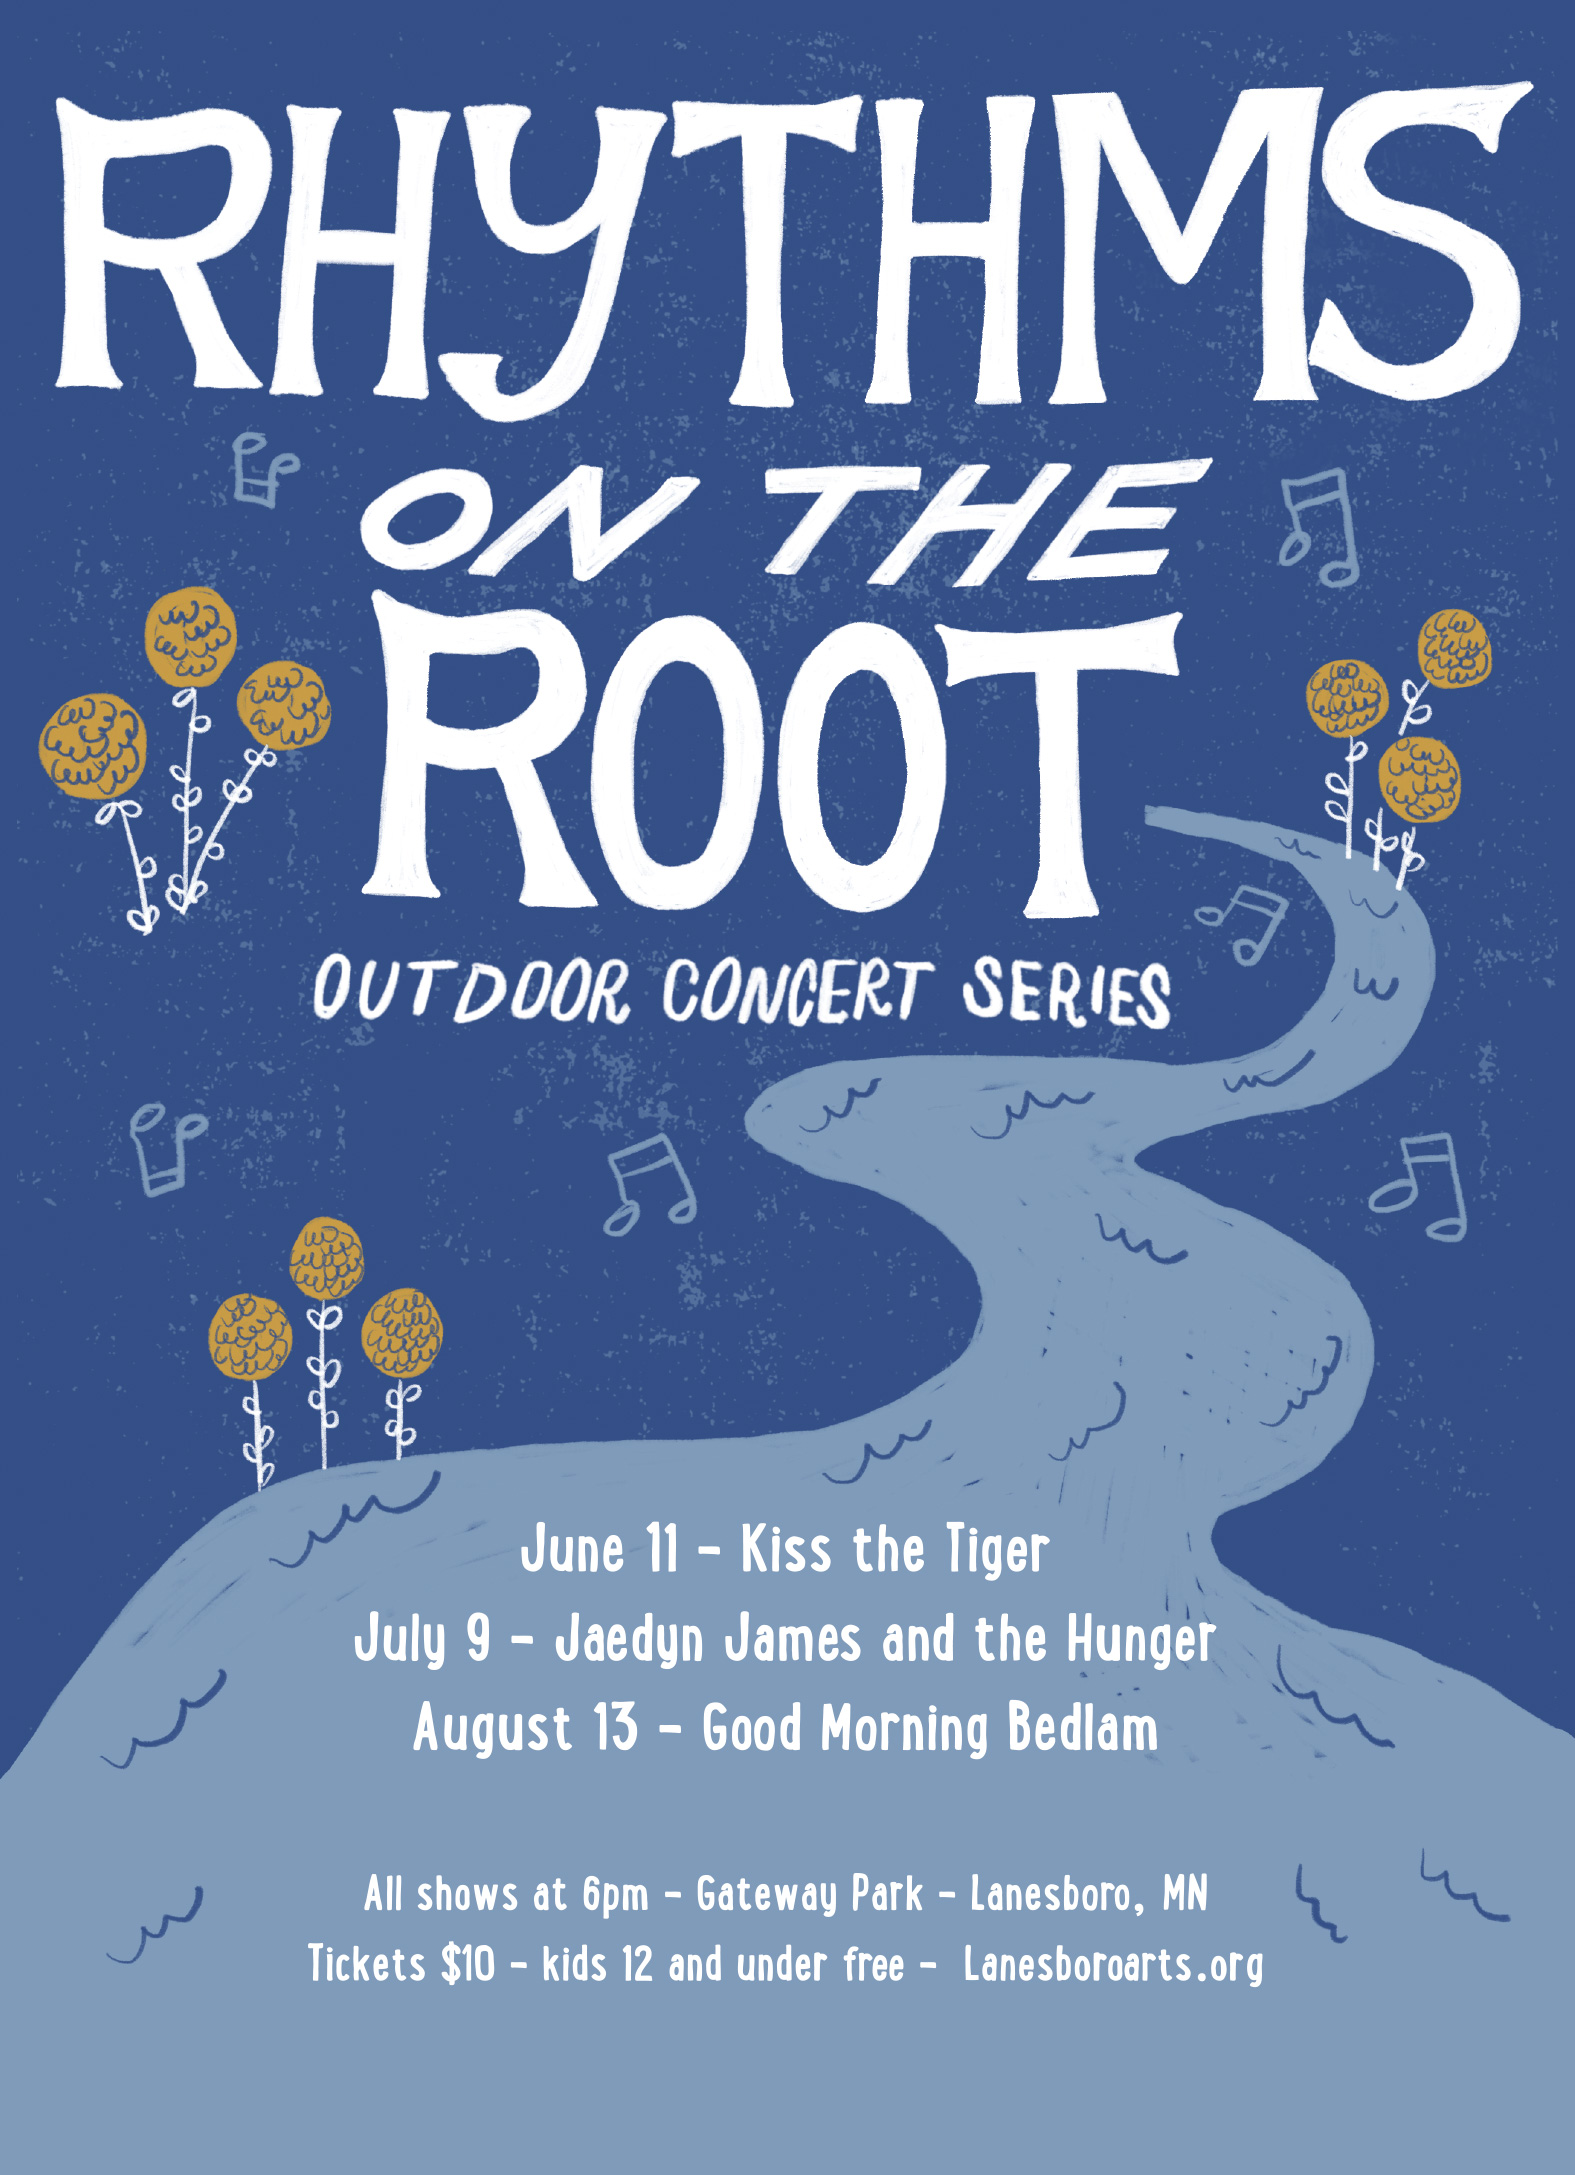 Illustrated event poster with text reading Rhythms on the Root, Outdoor Concert Series. June 11 Kiss the Tiger, July 9, Jaedyn James and the Hunger, August 13 Good Morning Bedlam, Gateway Park, Lanesboro, MN